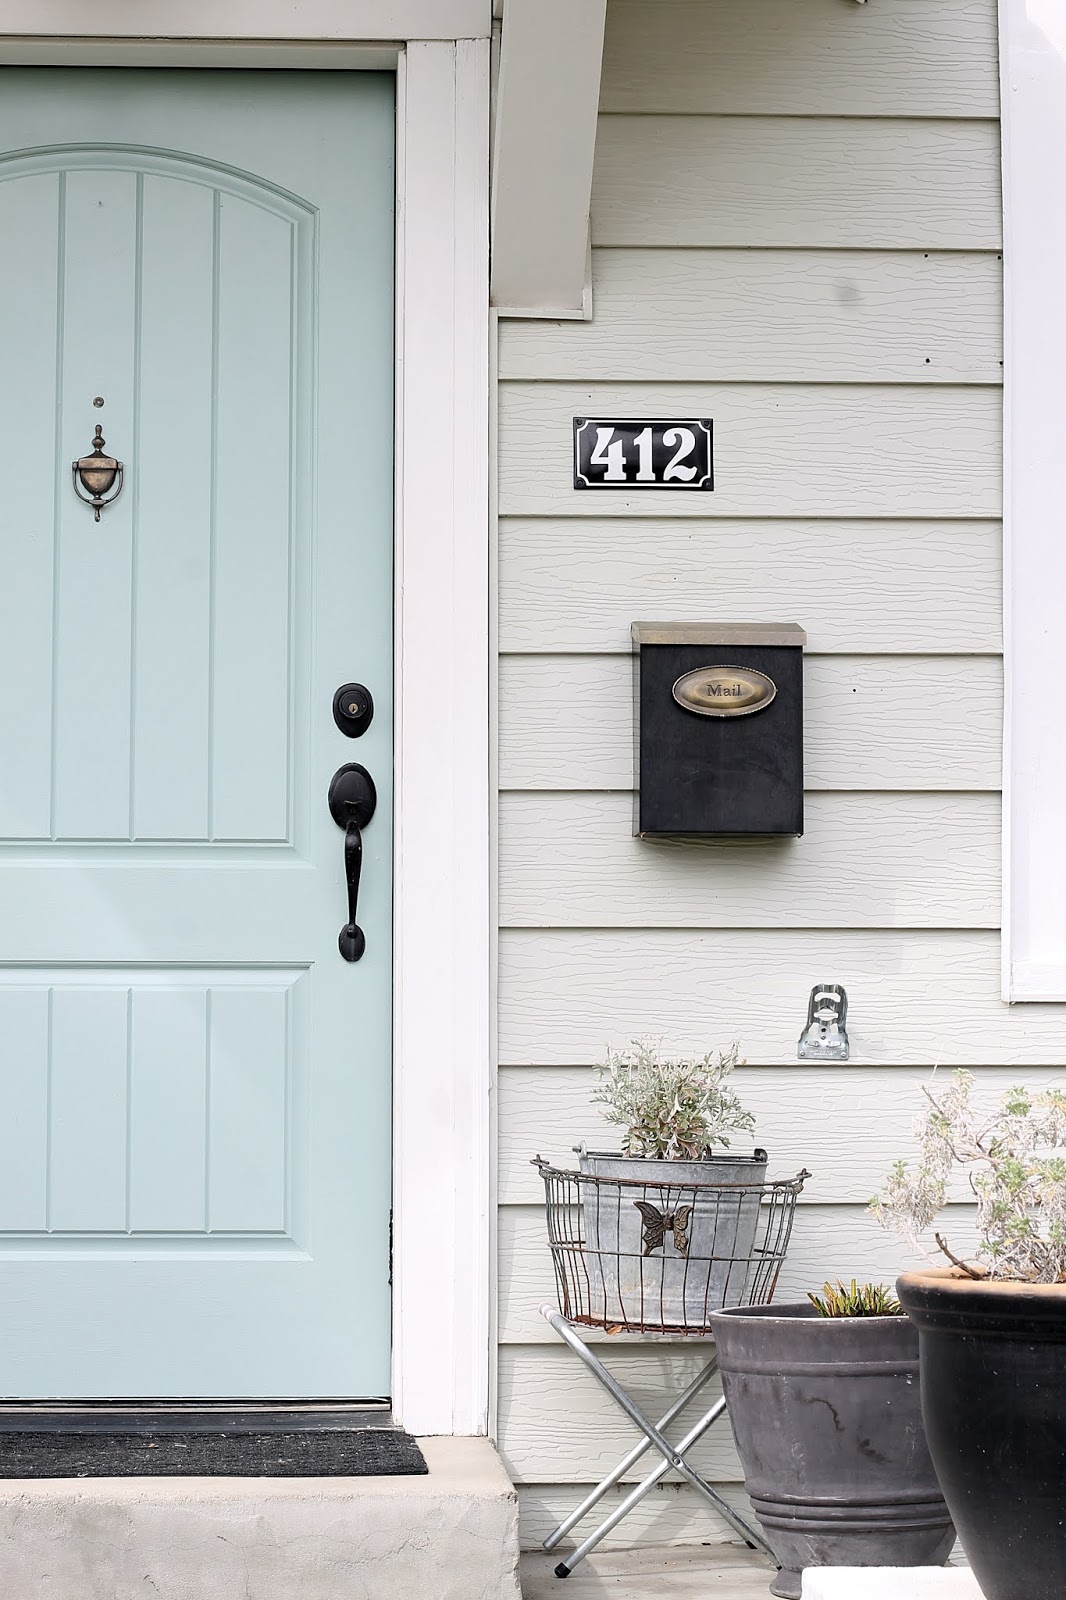 New Door Color - Wythe Blue - The Wicker House